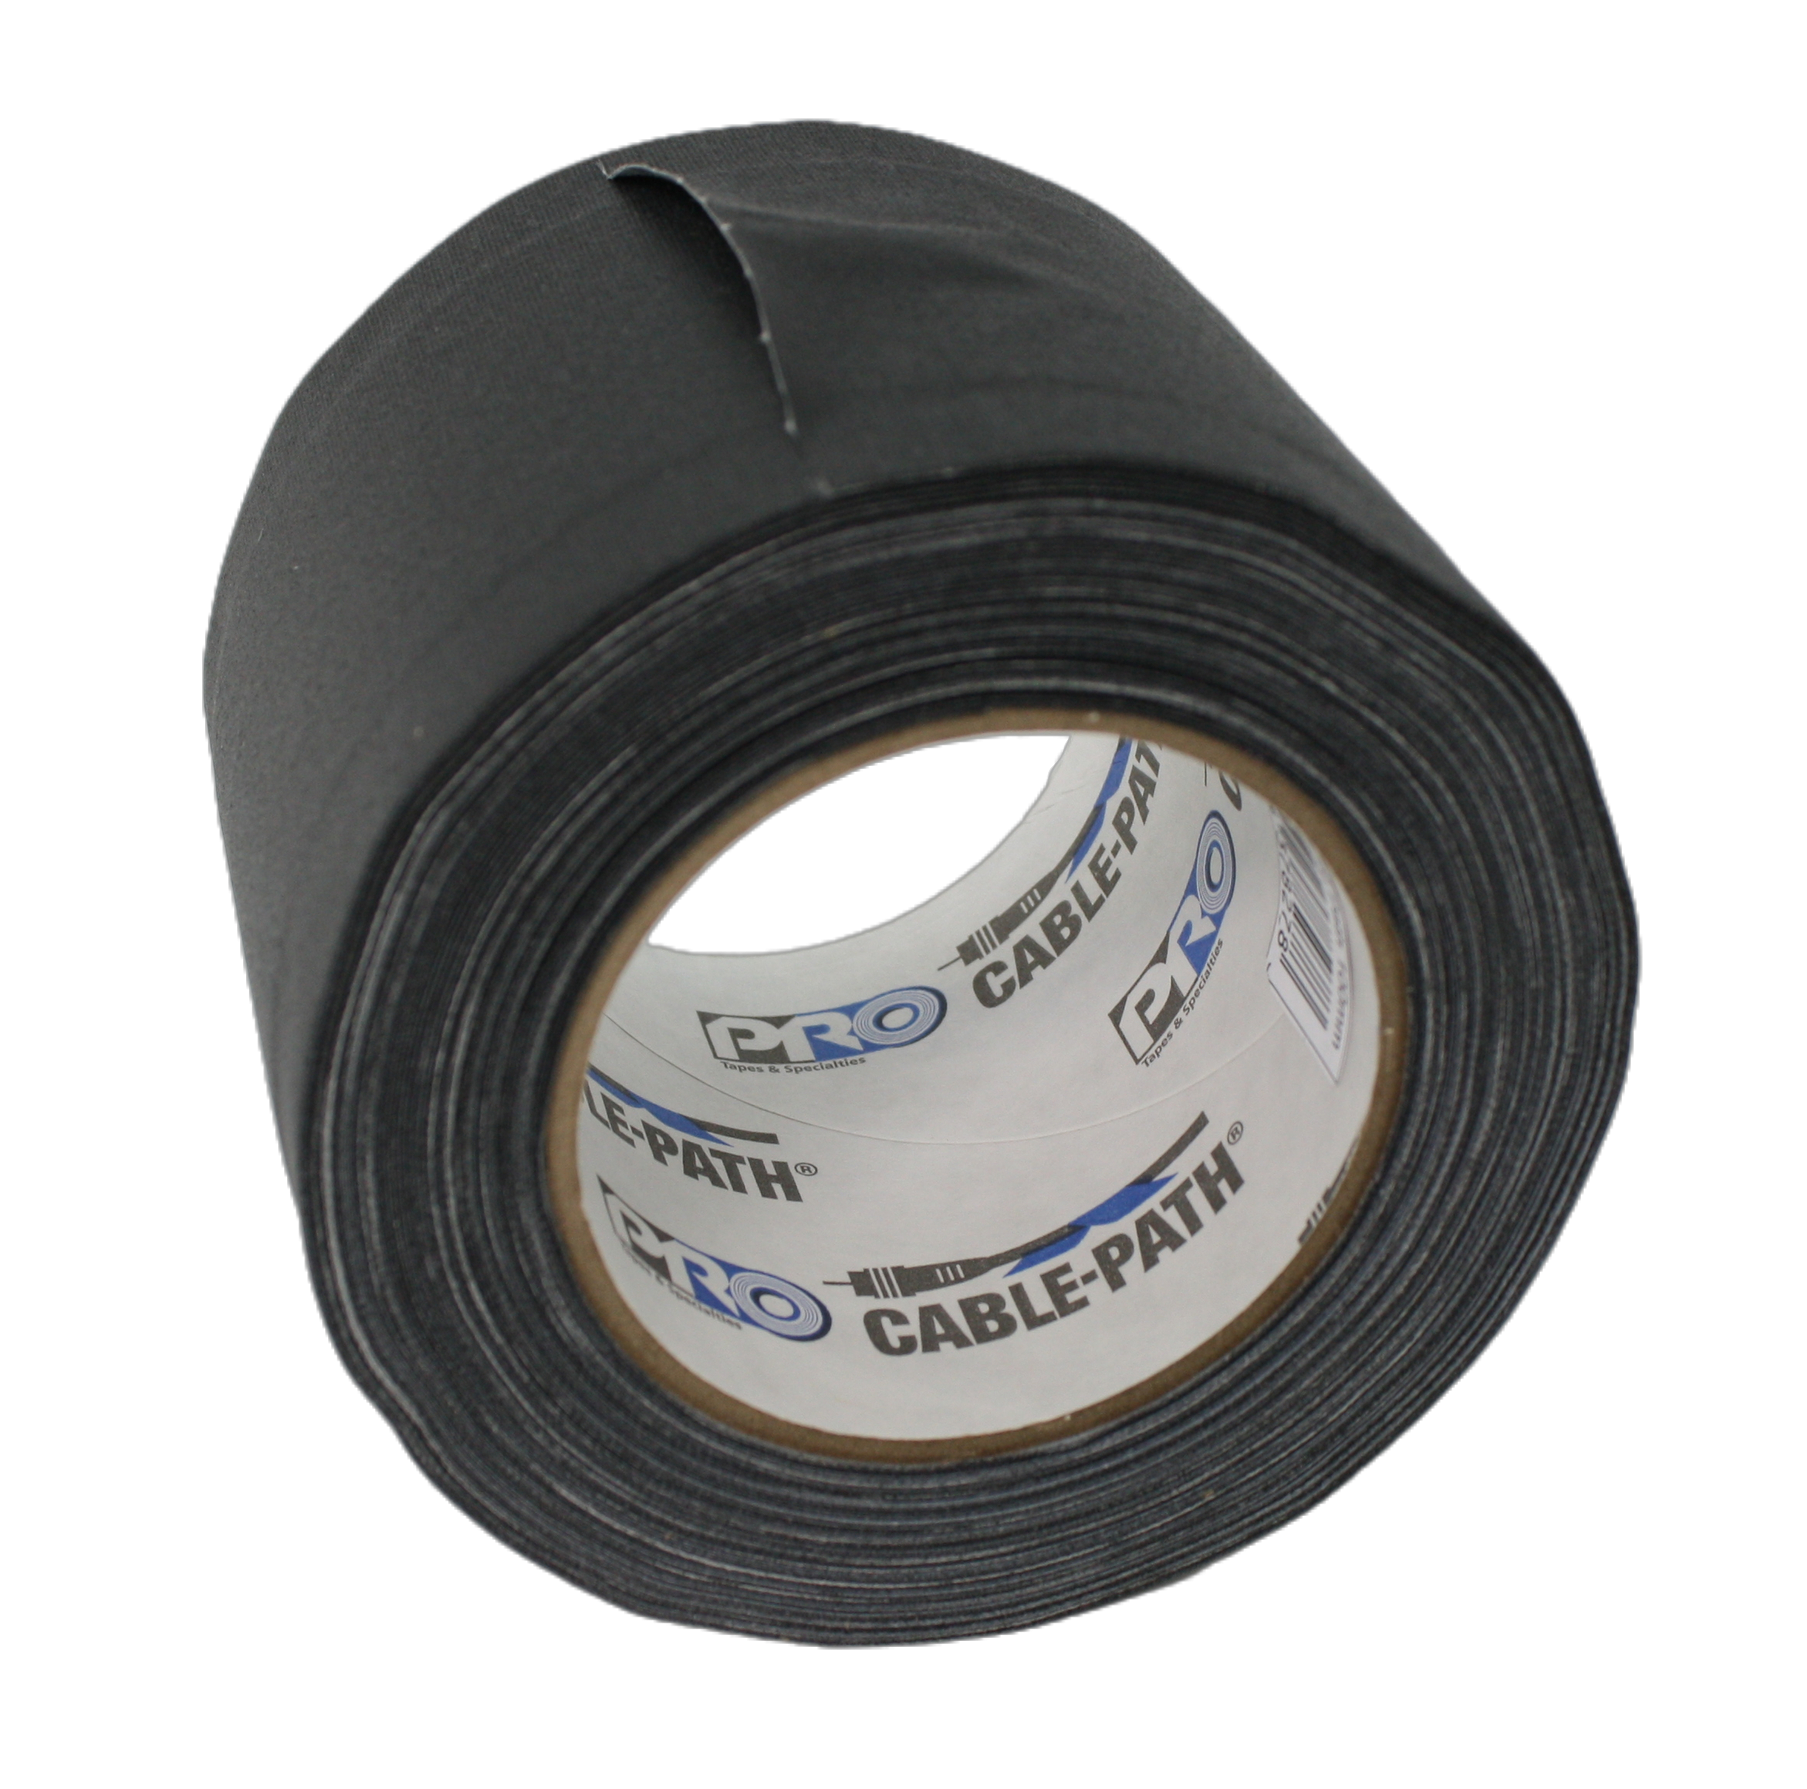 End view of the roll, focus on the Pro Cable-Path label